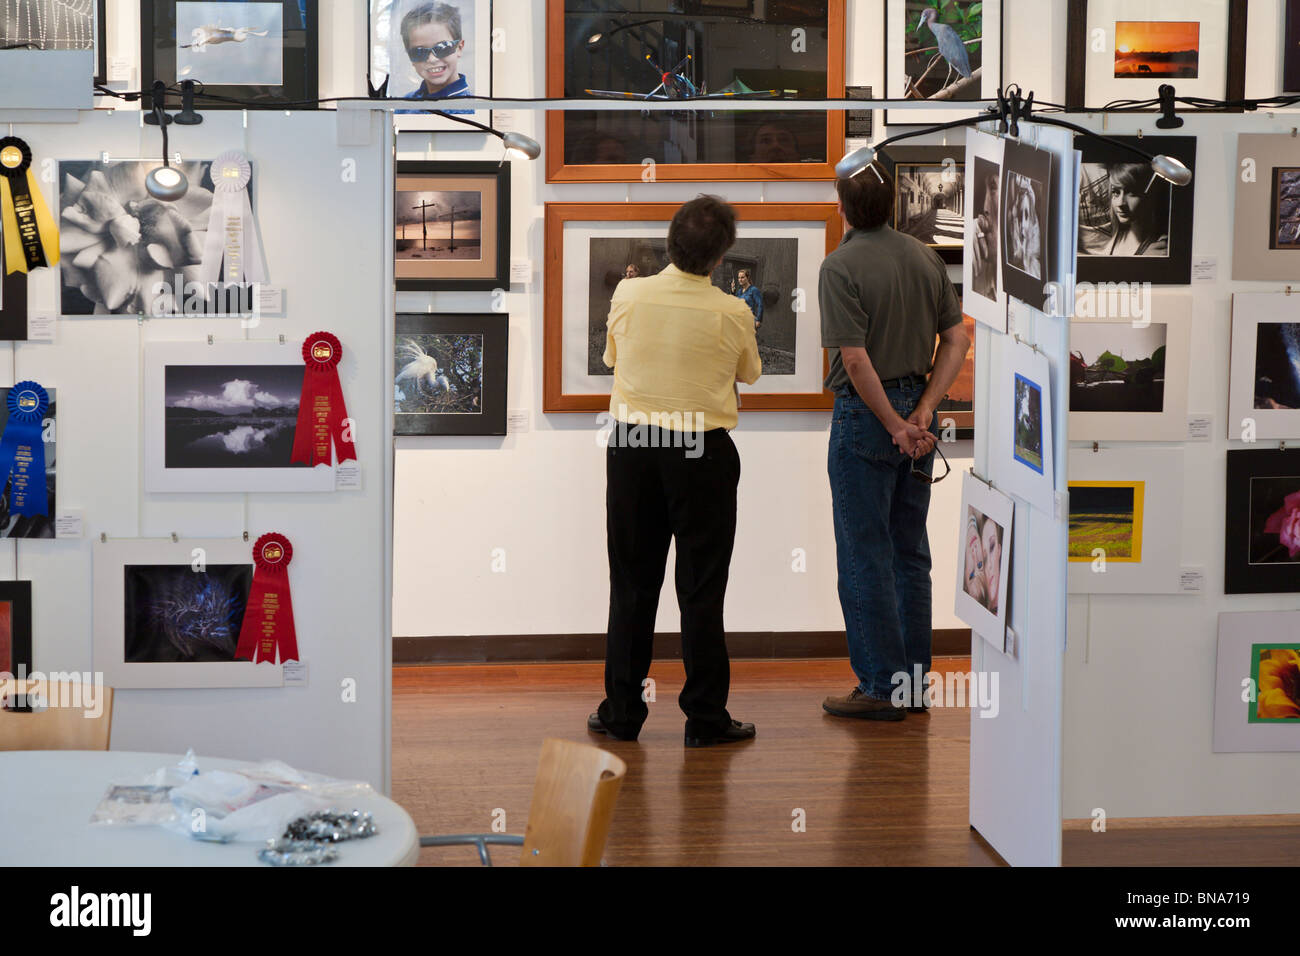 Visitors of an art gallery study a photography exhibit at Brick City Center for the Arts in downtown Ocala, Florida Stock Photo